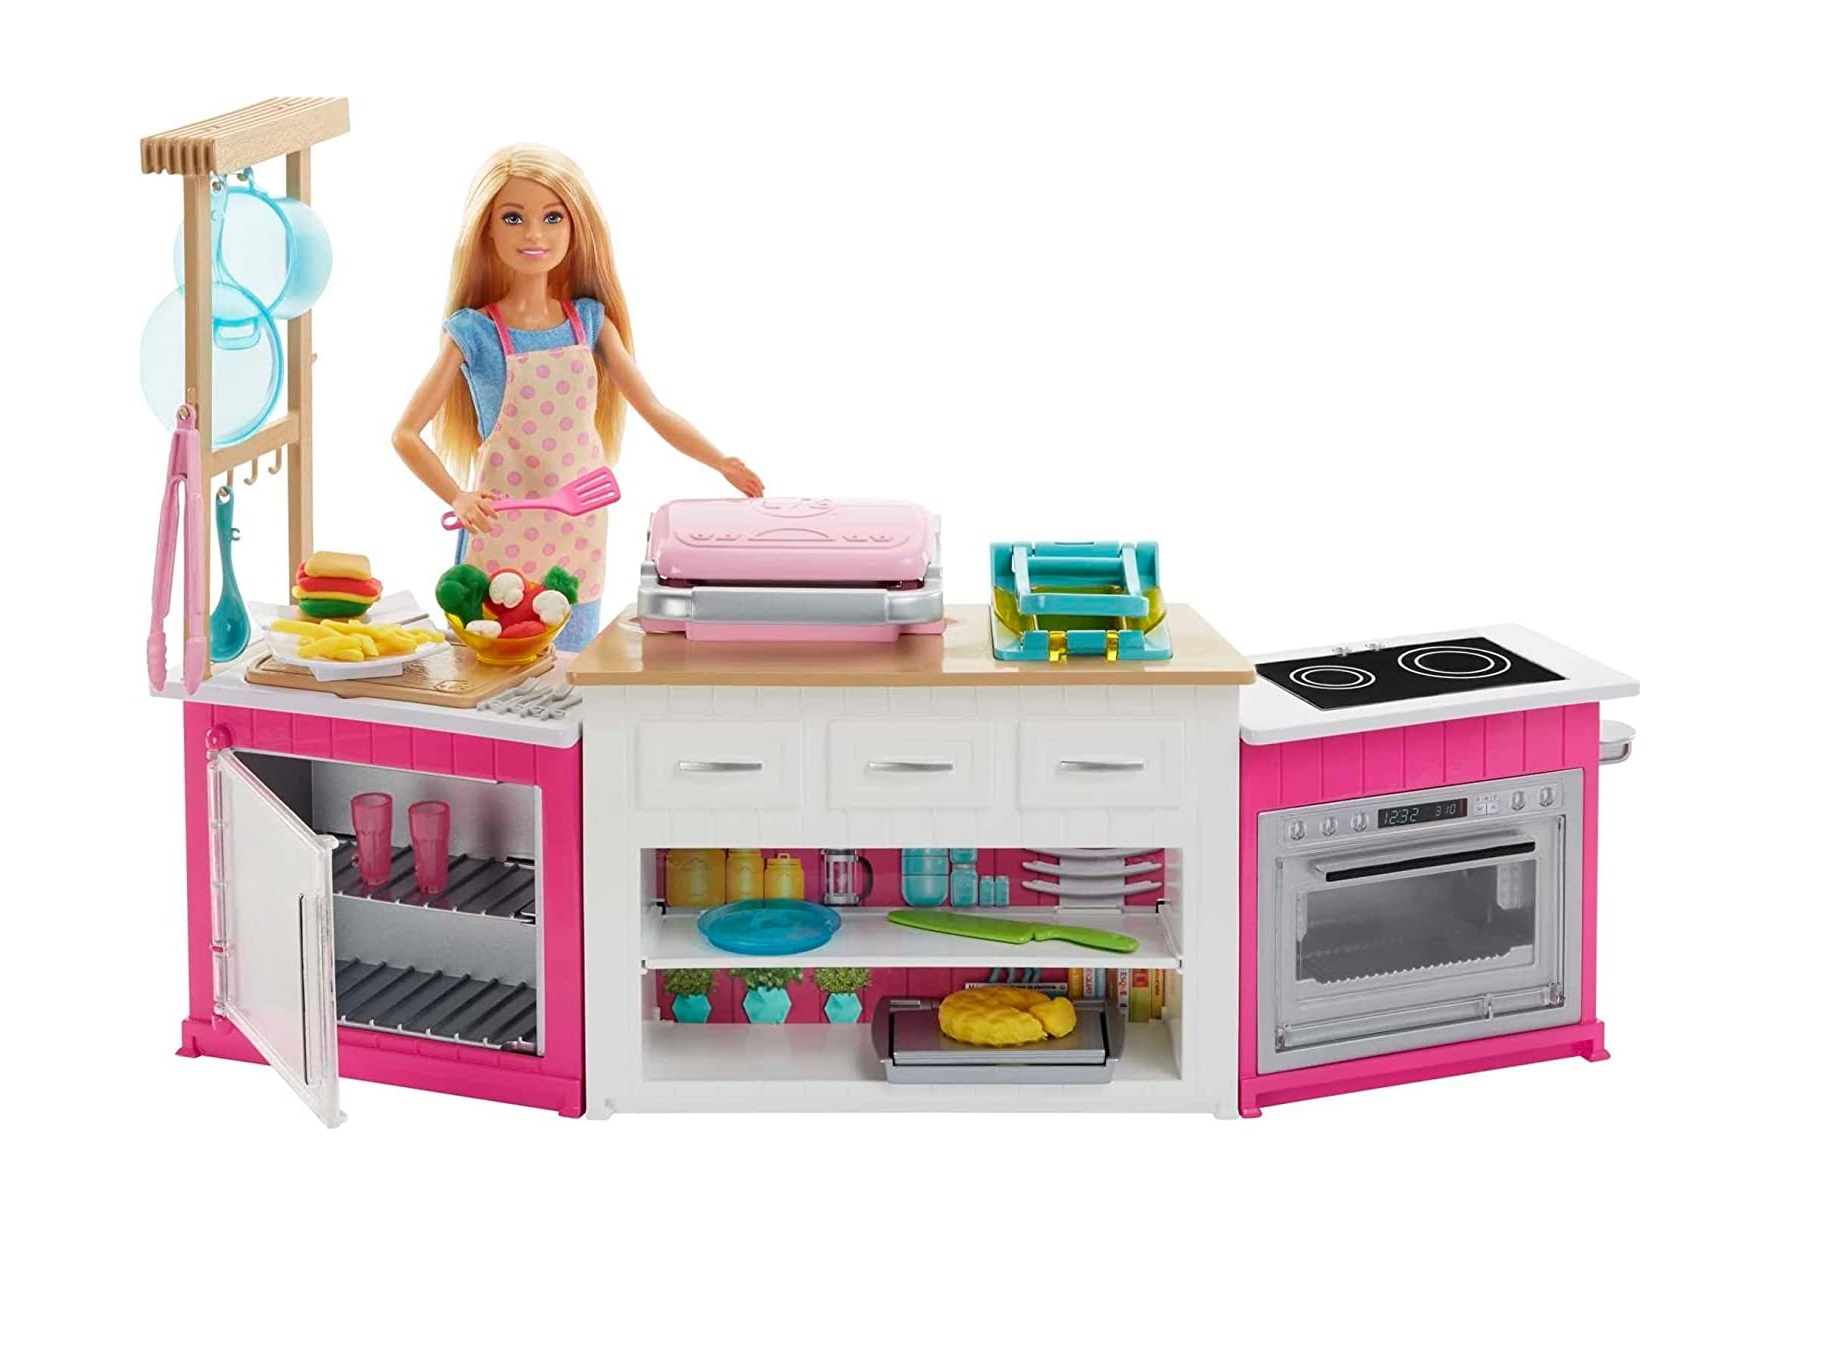 This doll has kitchen accessories.